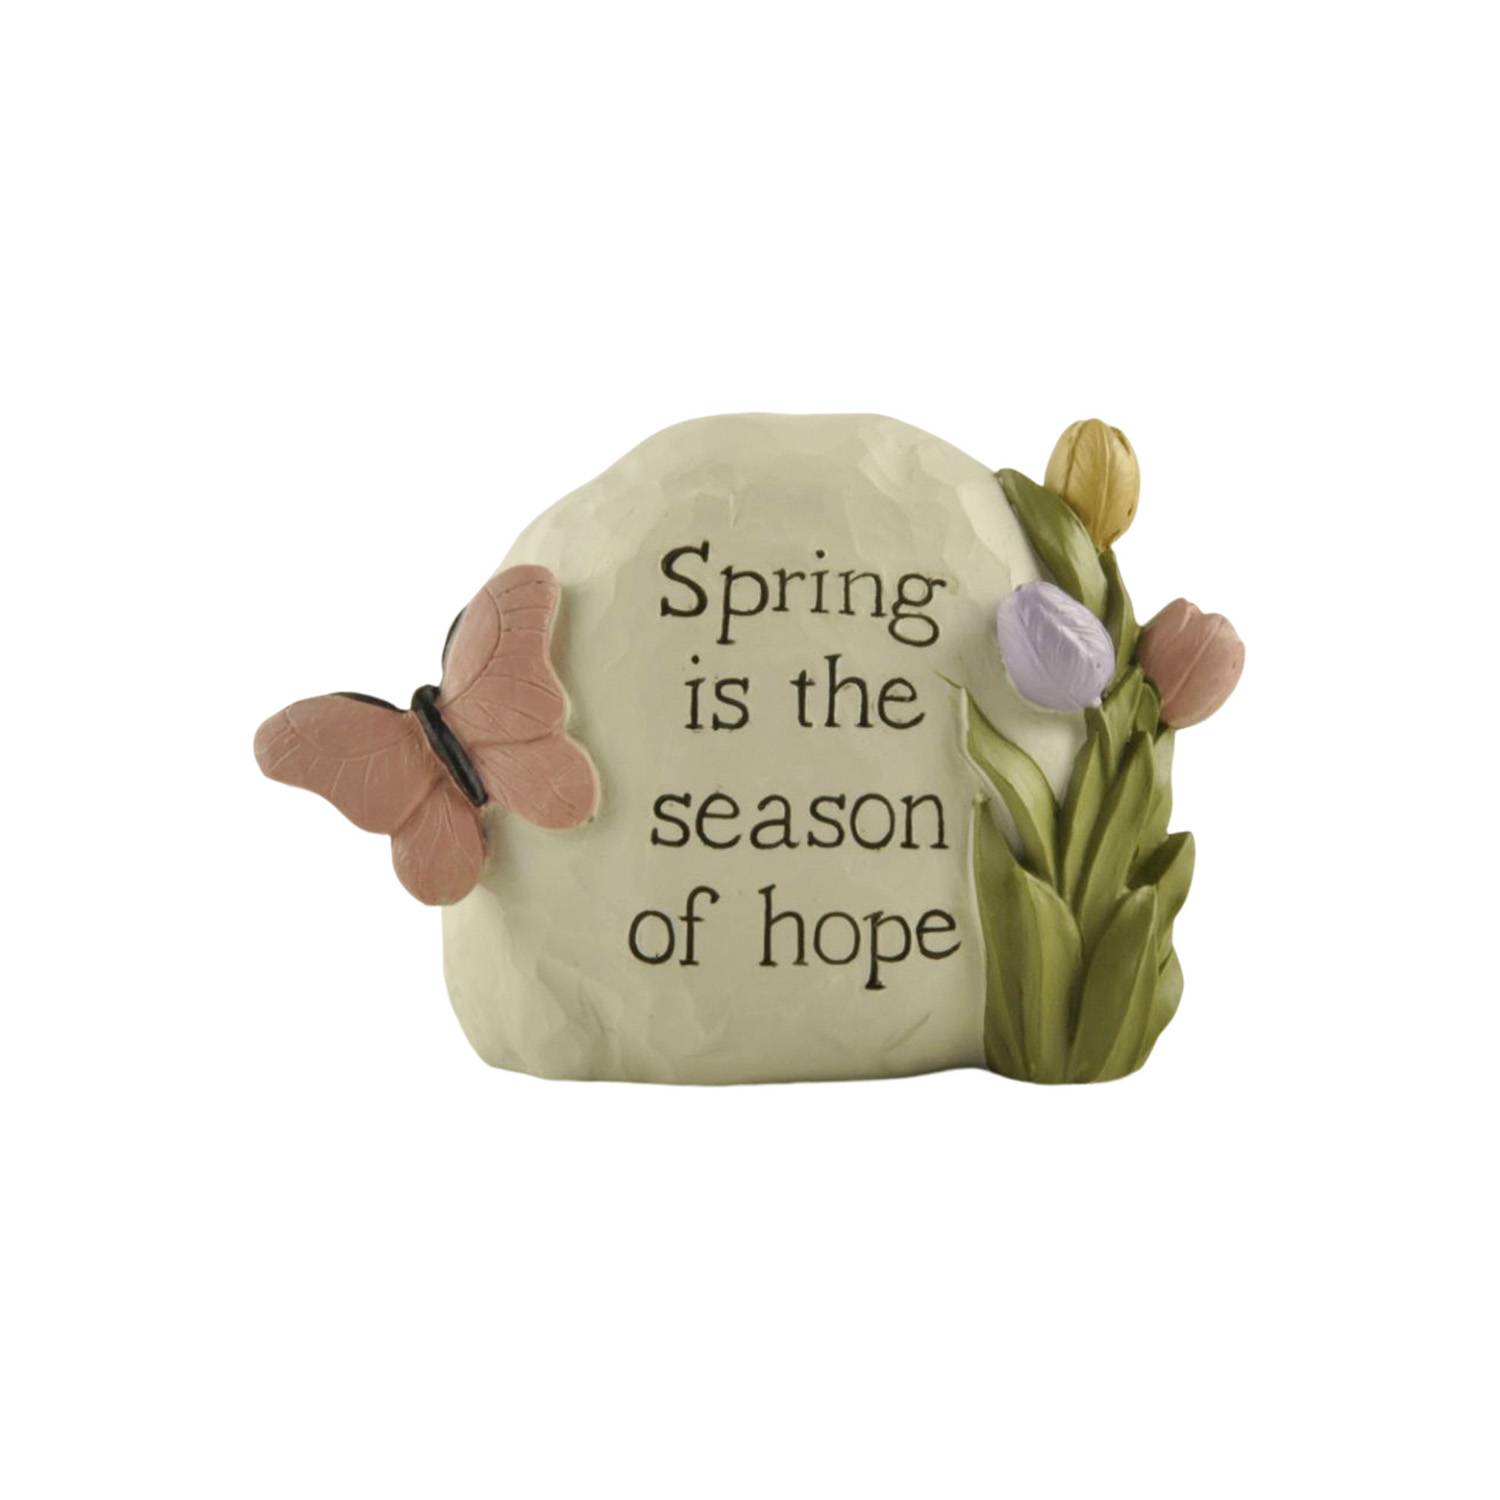 Spring Gnome Decorations Stone w/Flowers & Butterfly-Spring is Hope Table Gnome Decor Indoor Home Decorations231-13682